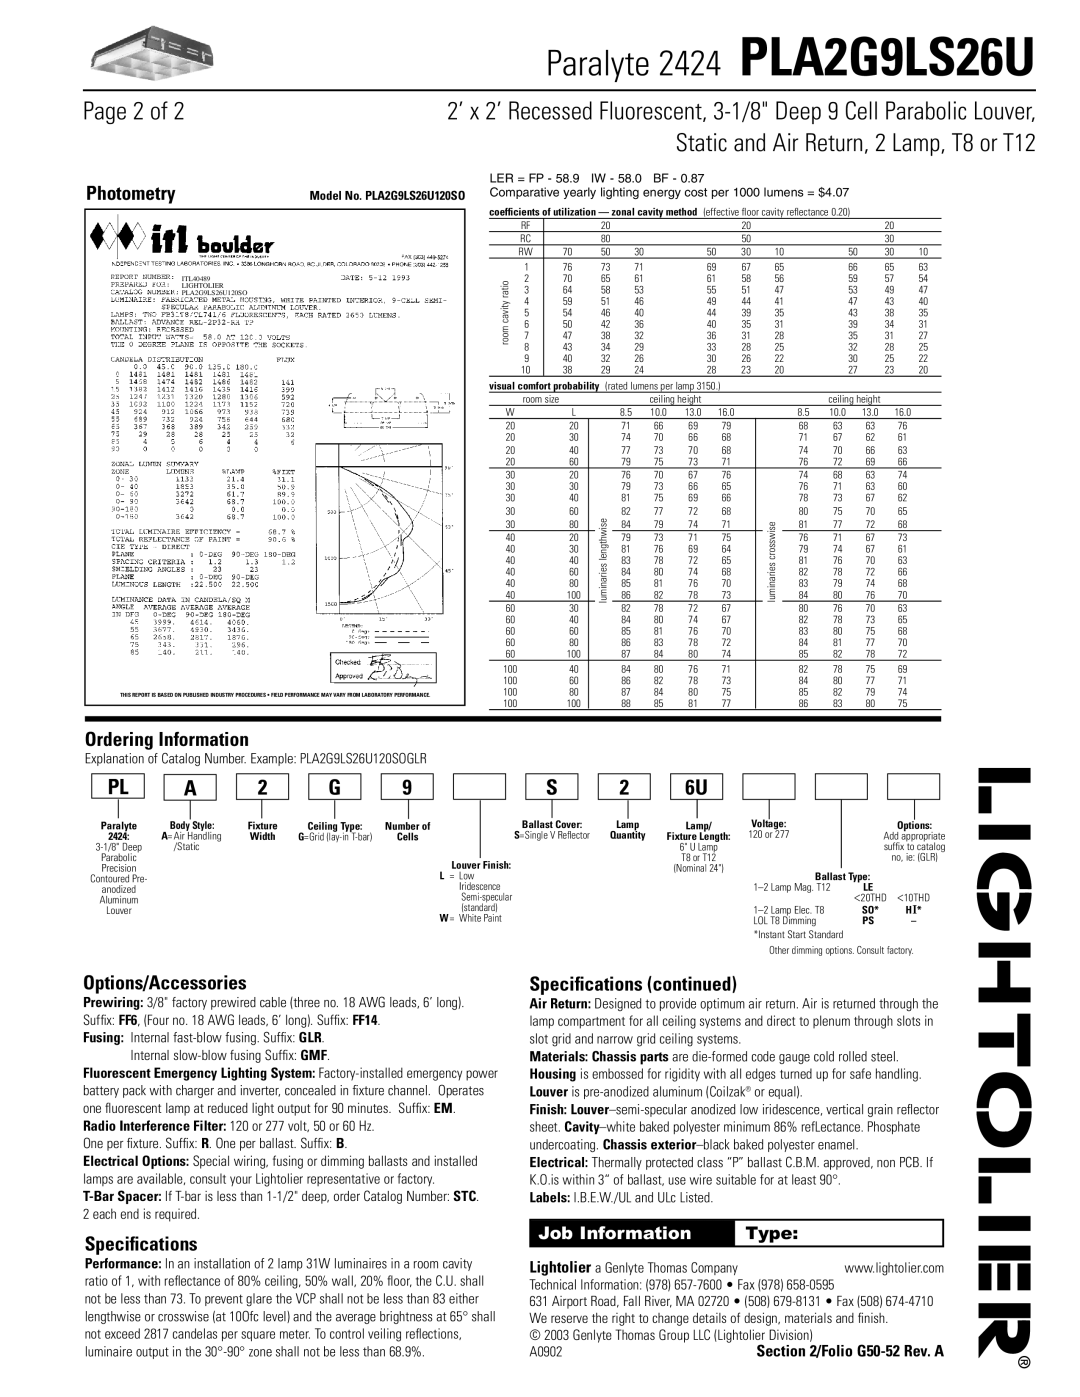 Lightolier PLA2G9LS26U dimensions Page 2 of, Photometry, Ordering Information, Options/Accessories, Speciﬁcations, Type 